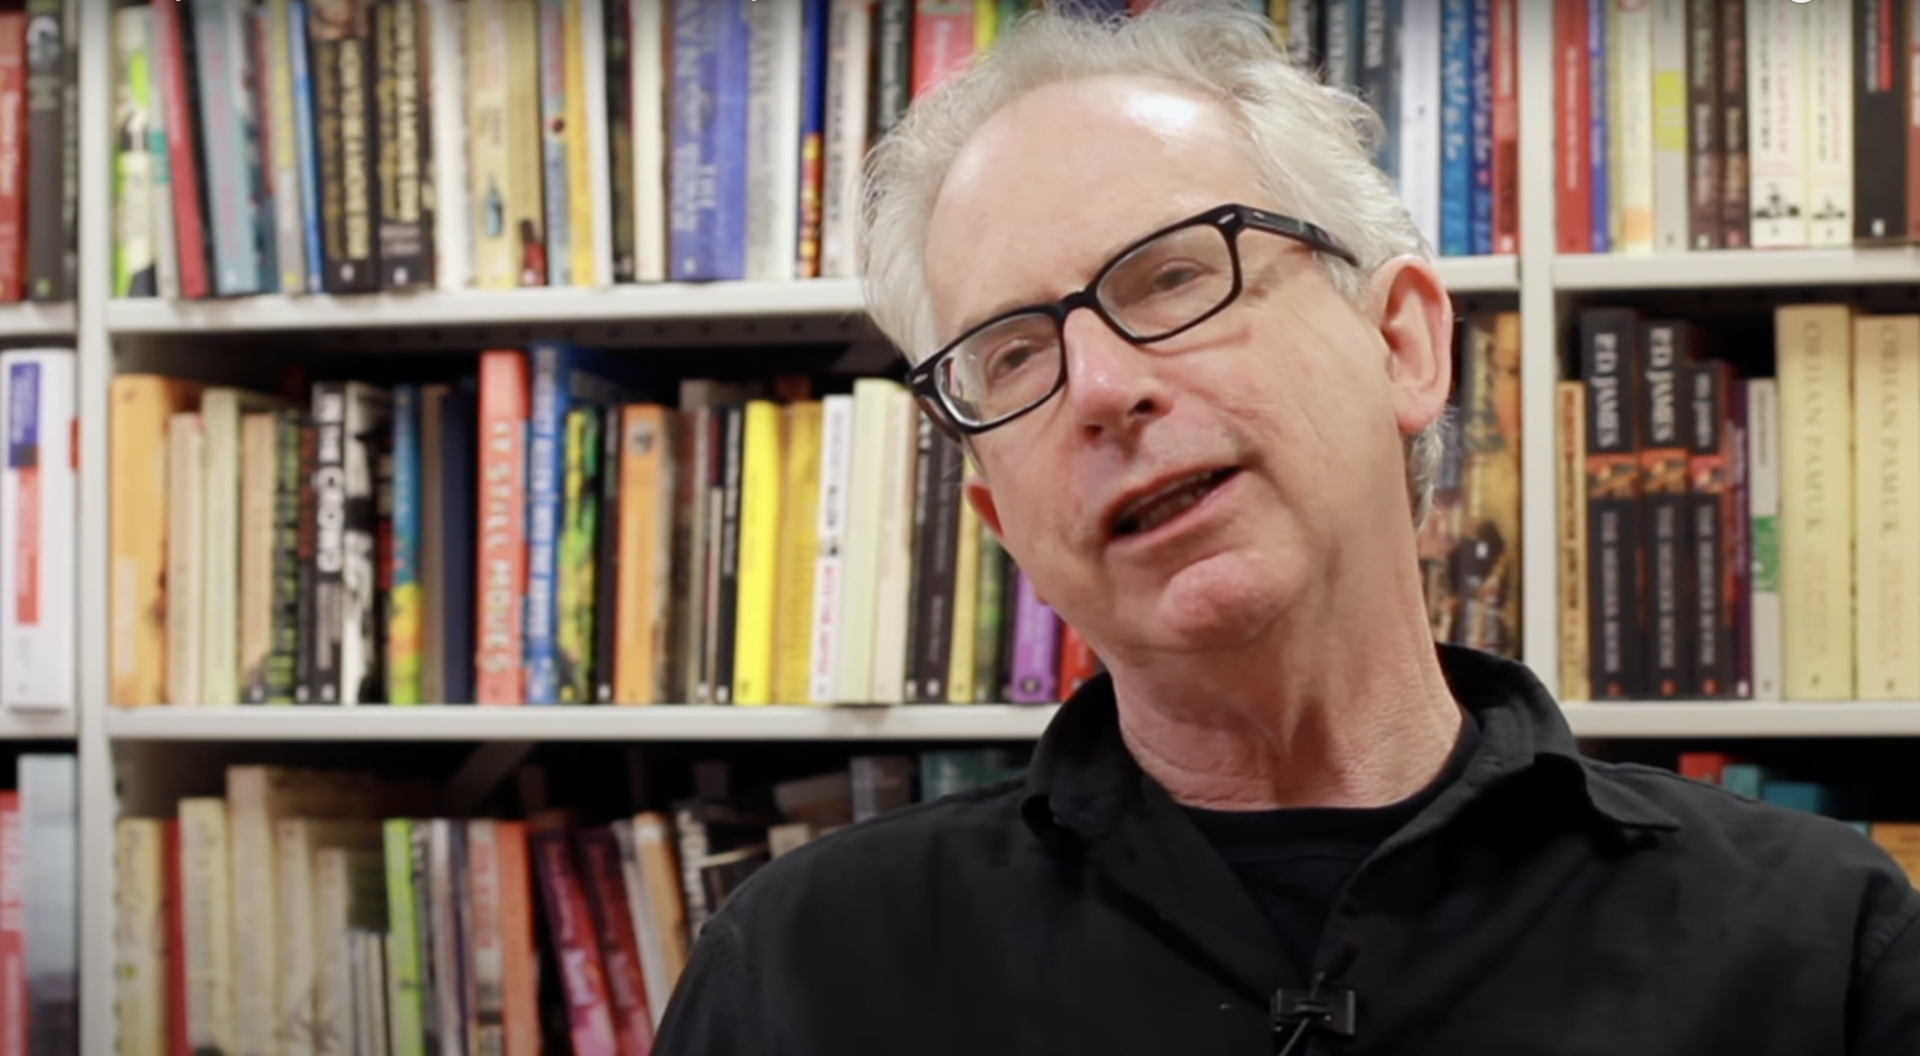 Peter Carey introduces his novel The Chemistry of Tears